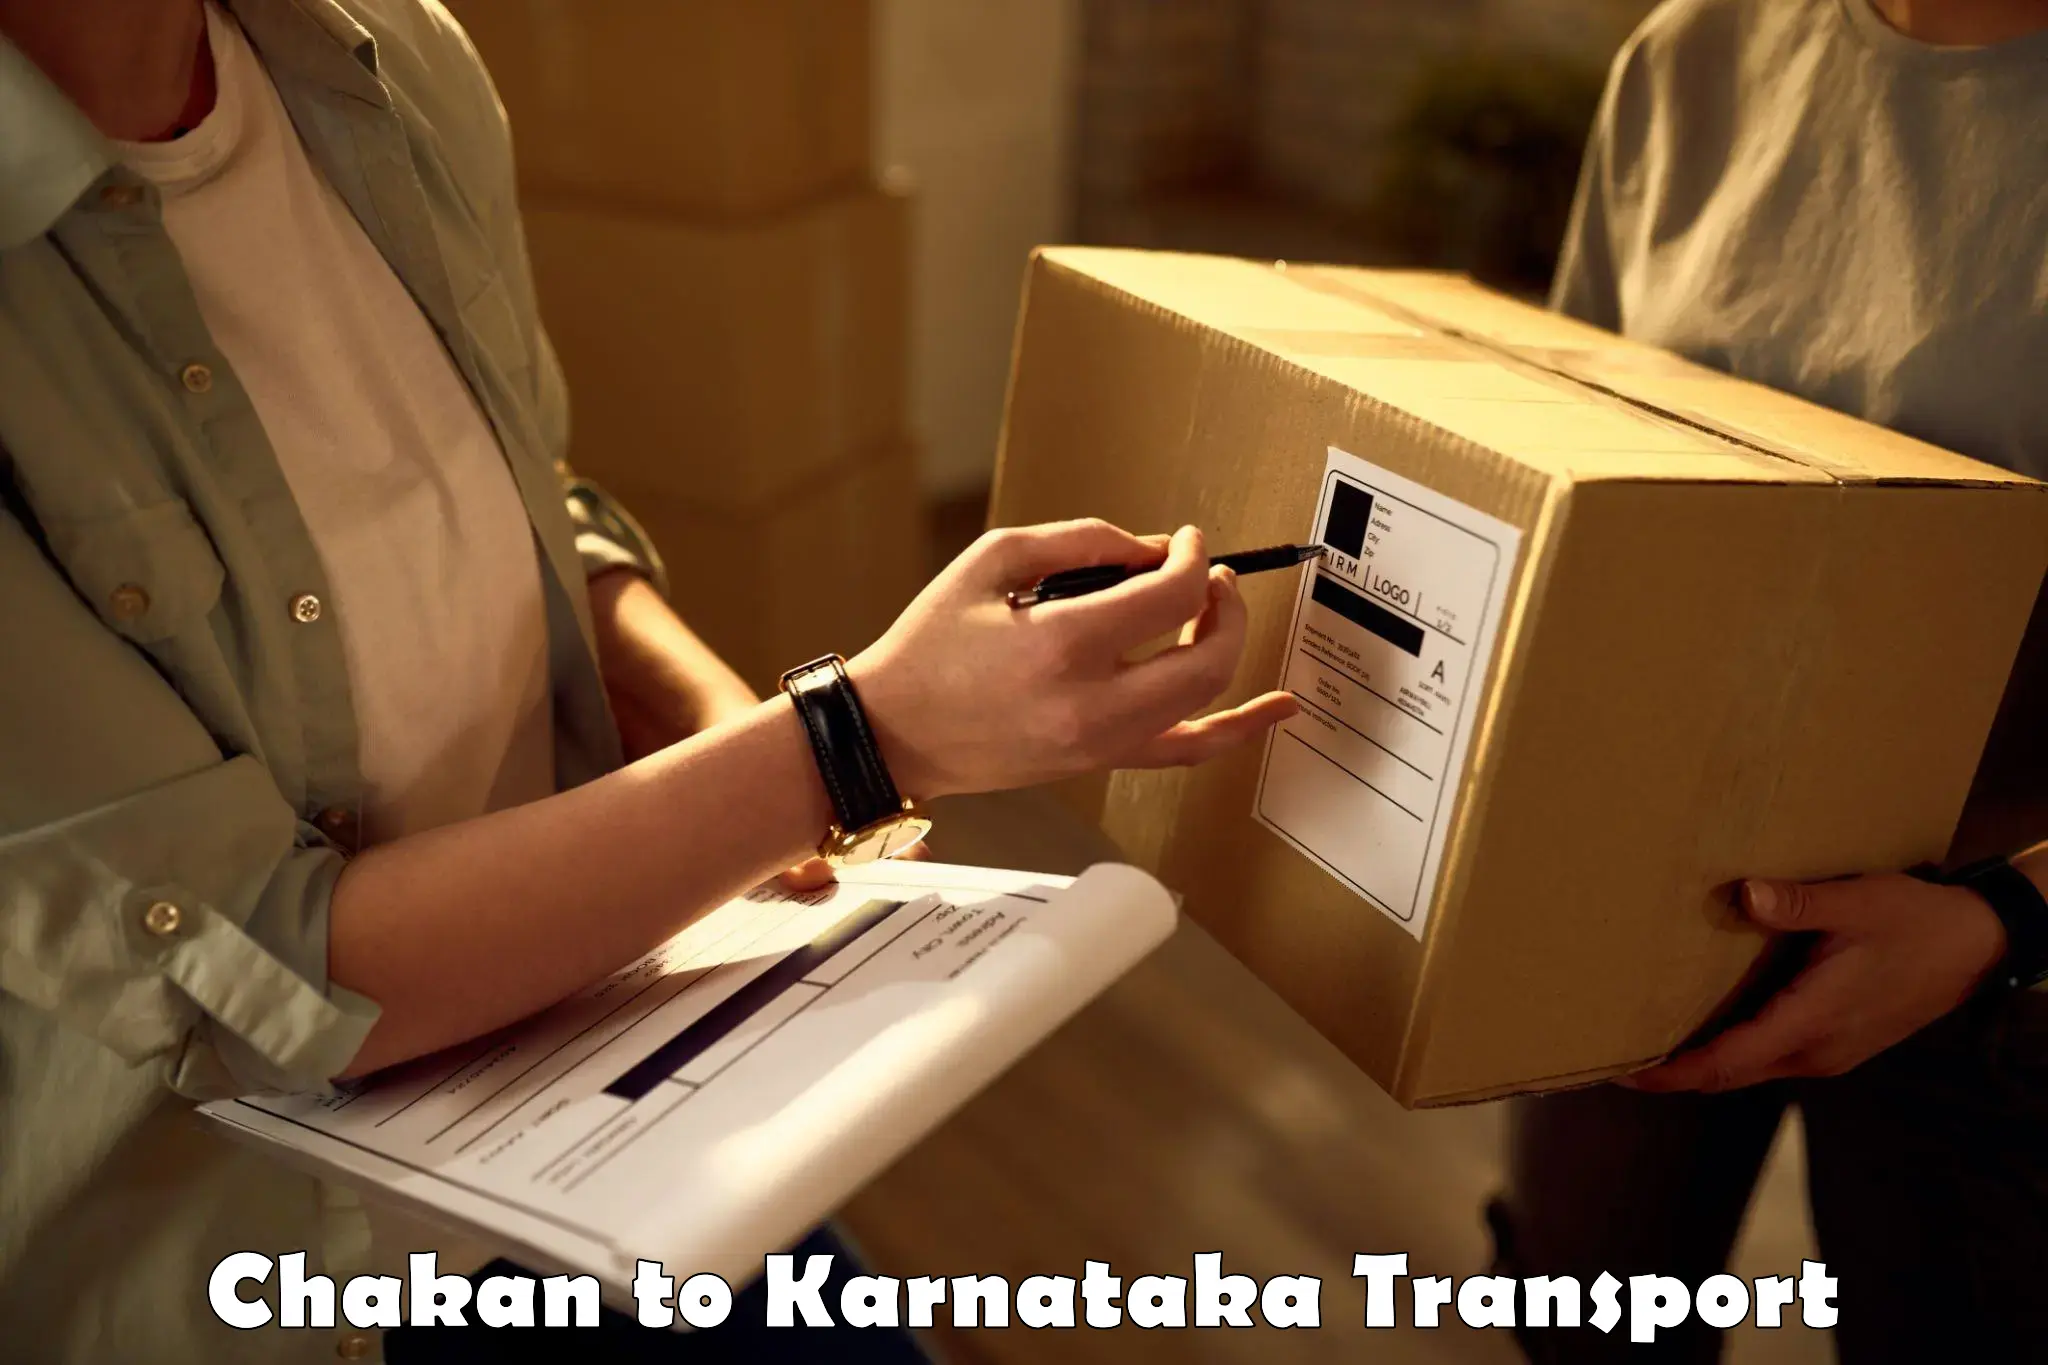 Parcel transport services Chakan to Bangalore